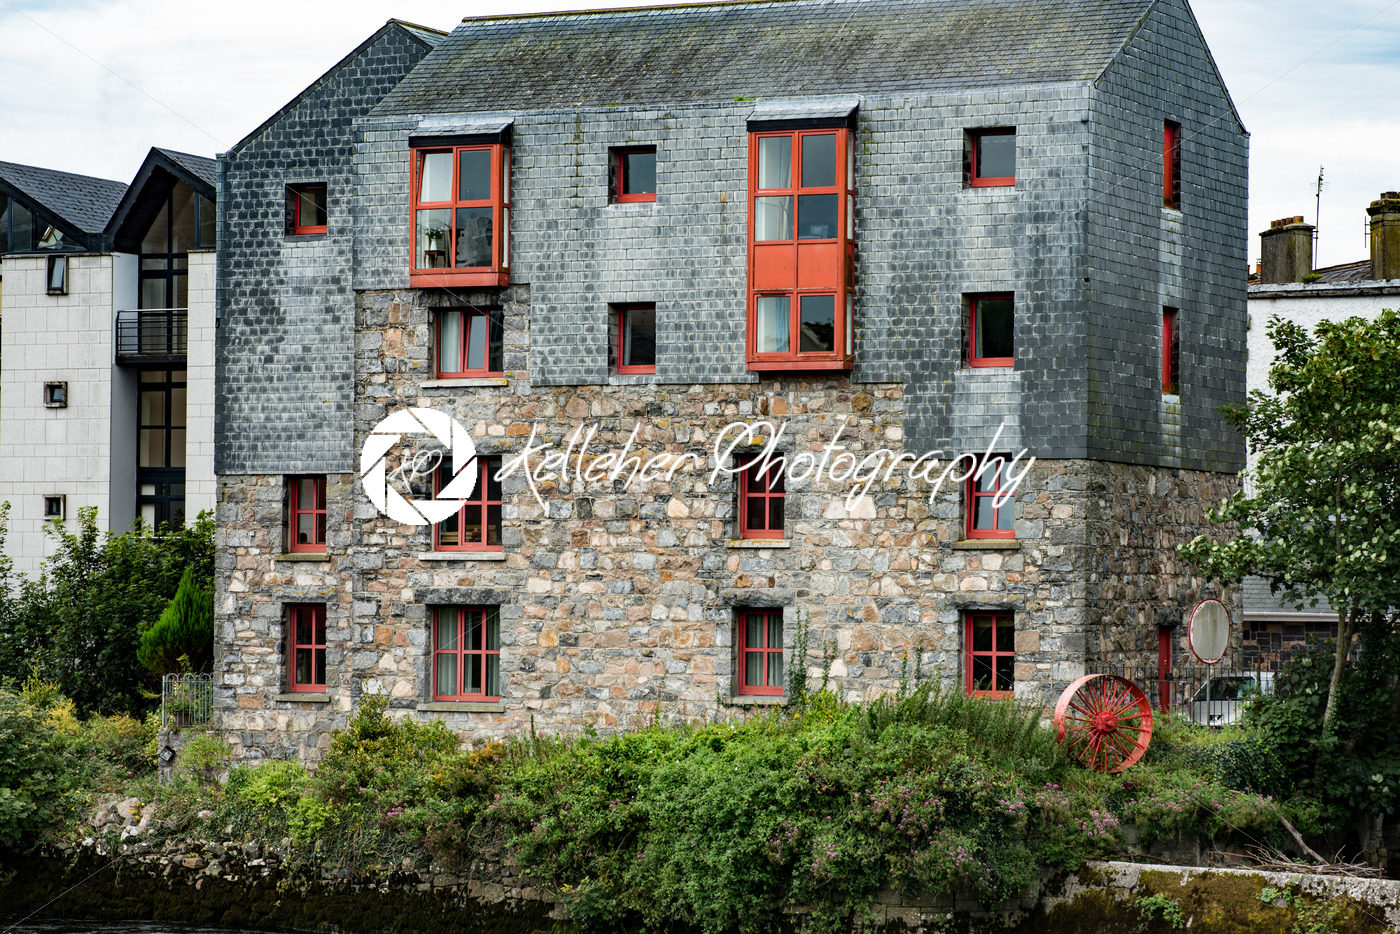 GALWAY, IRELAND – AUGUST 22, 2017: Architecture of city center of Galway Ireland - Kelleher Photography Store